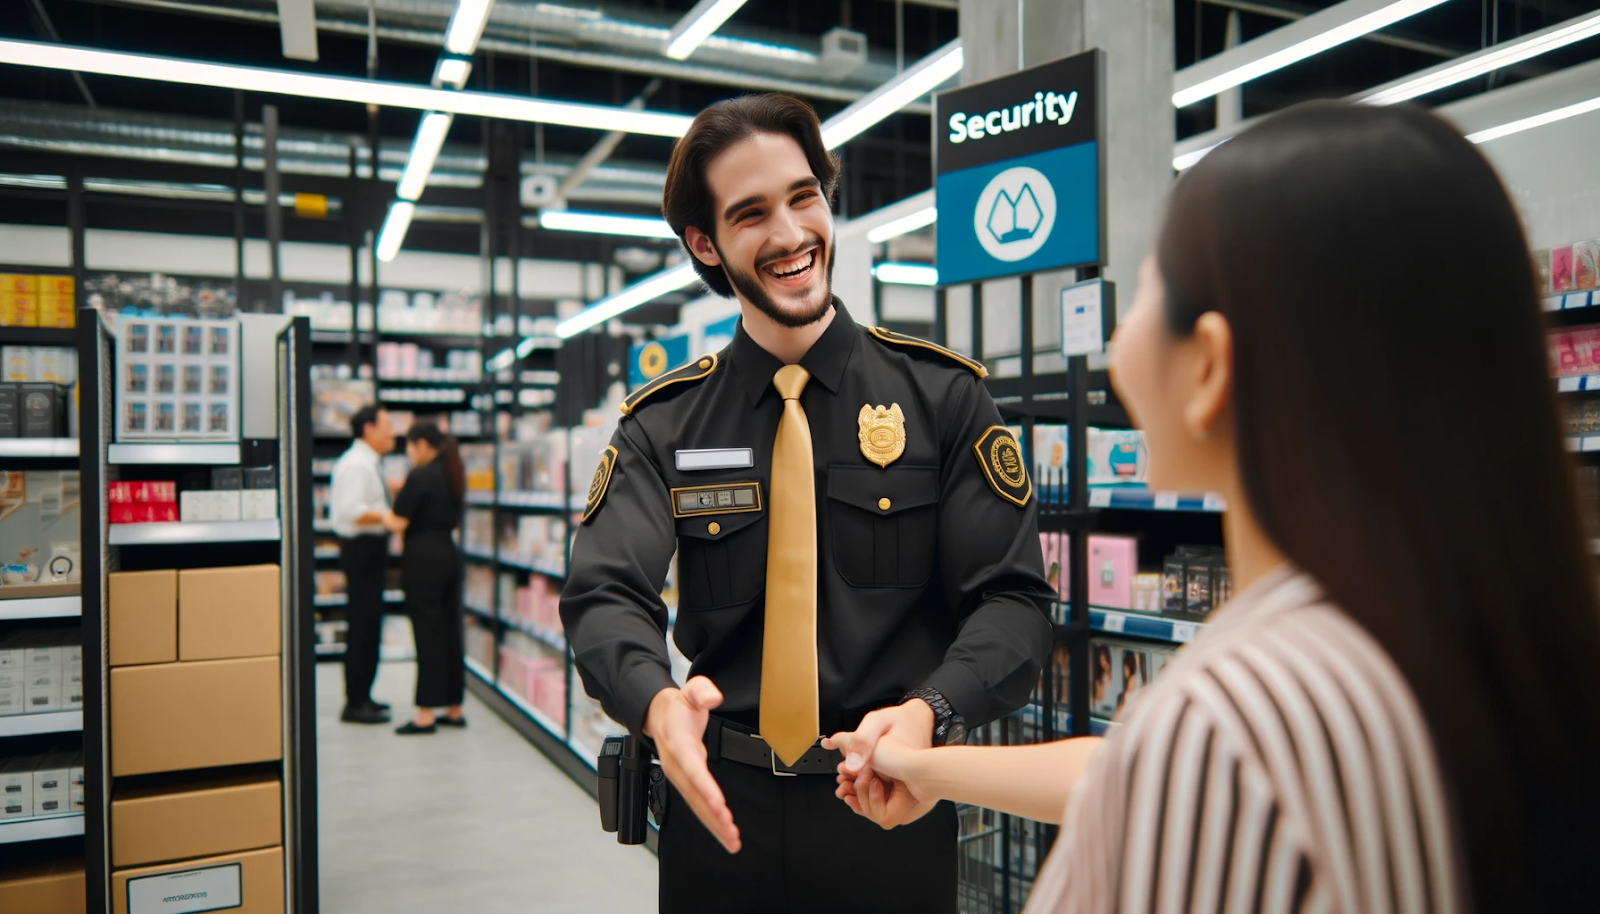 Cheerful security guard in black and gold uniform assisting customers in a retail store, enhancing loss prevention.